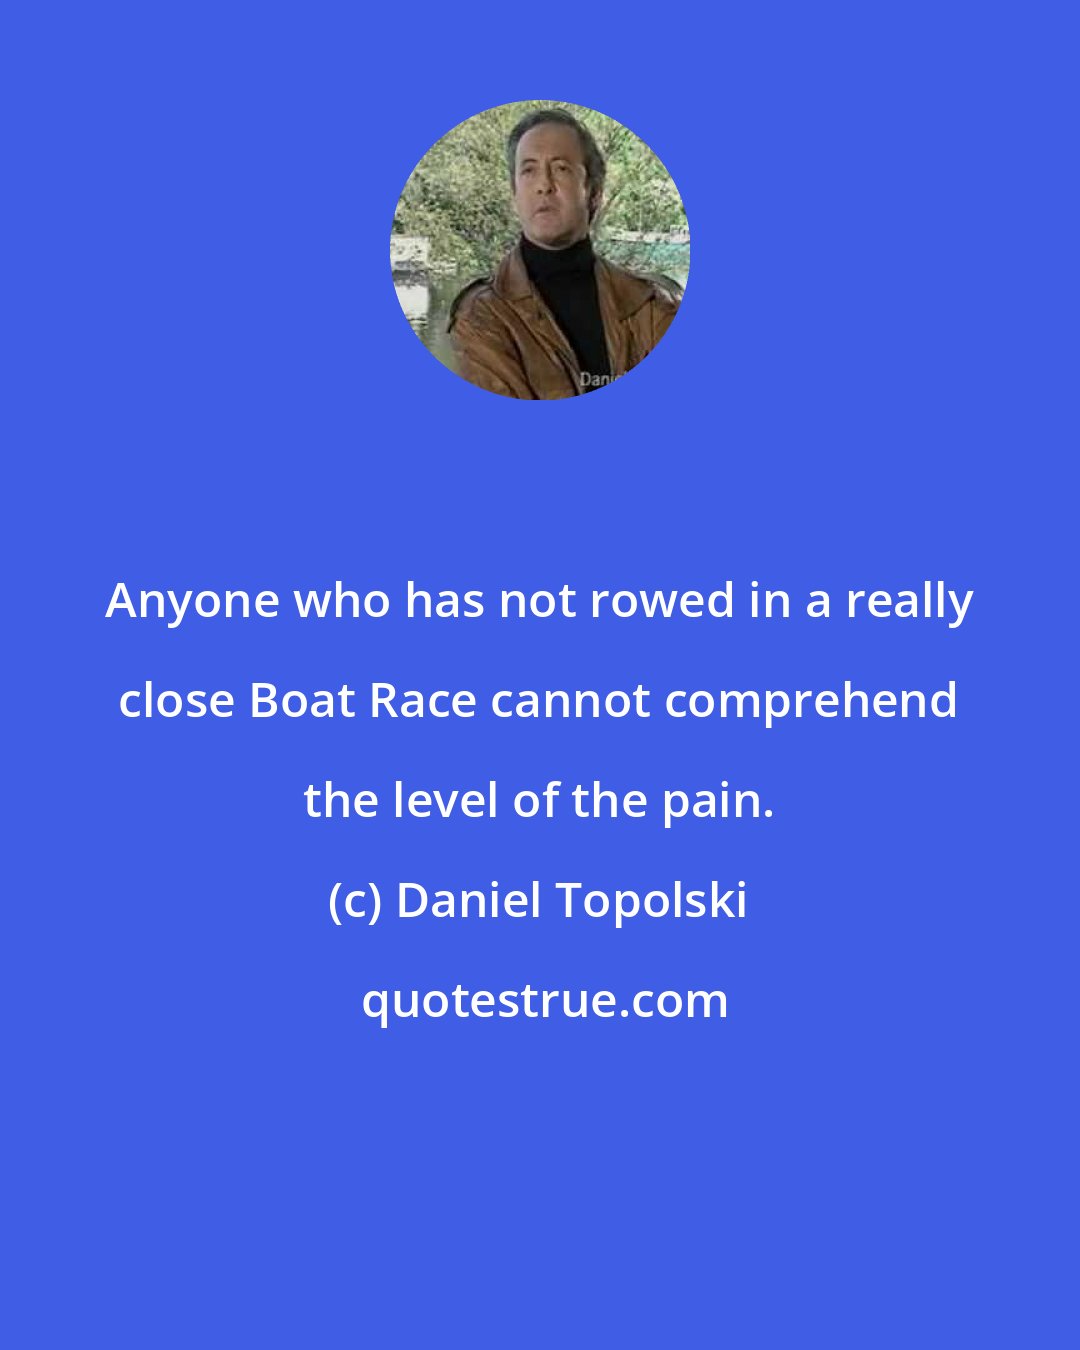 Daniel Topolski: Anyone who has not rowed in a really close Boat Race cannot comprehend the level of the pain.